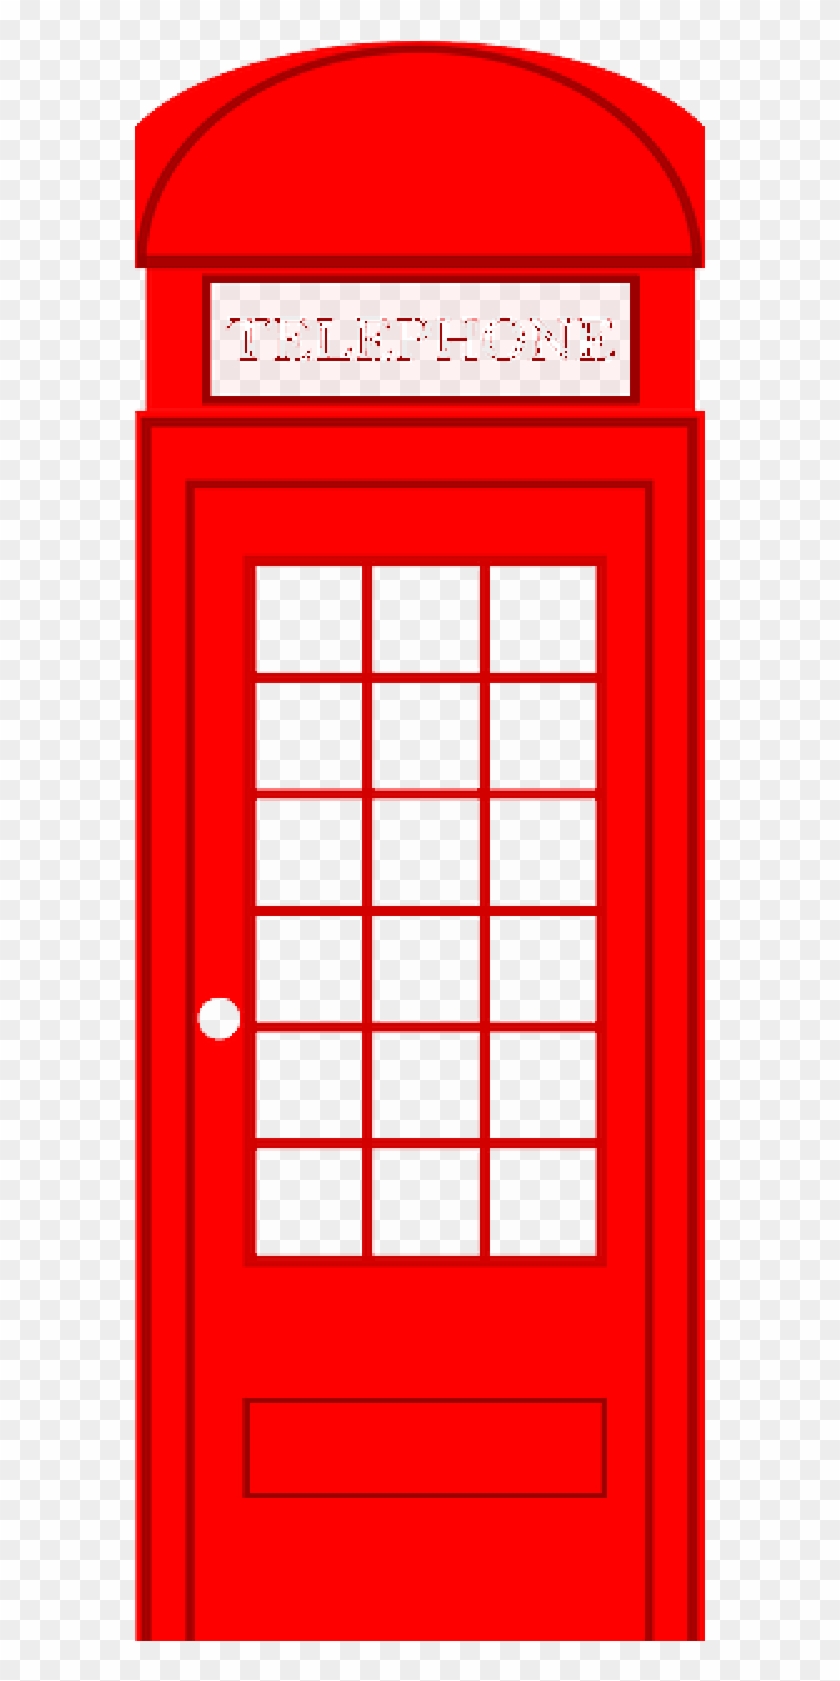 Phone Box, Telephone Booth, Telephone Box, Call Booth - London Telephone Booth Clipart #1252010